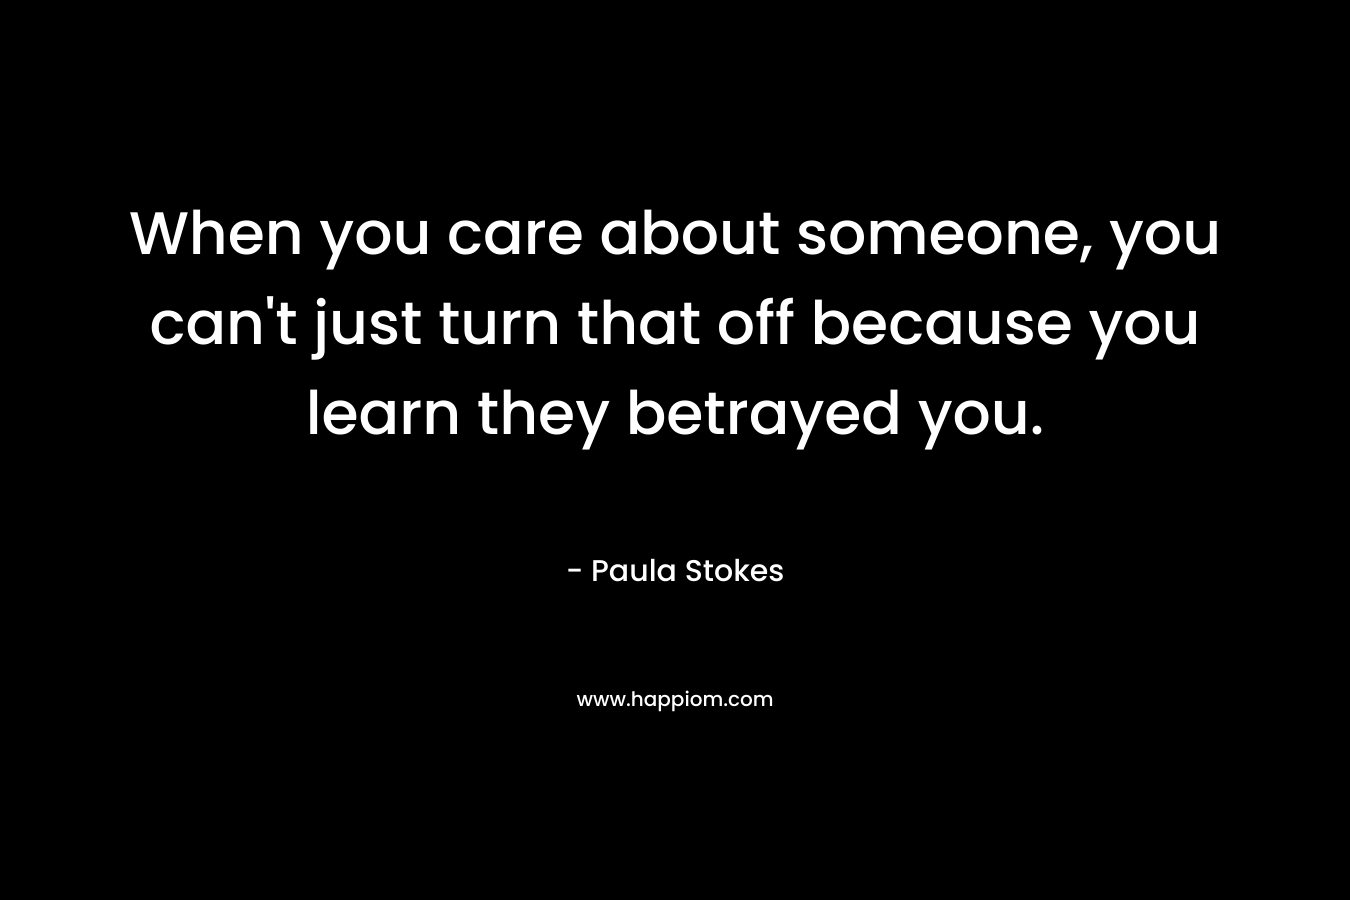 When you care about someone, you can't just turn that off because you learn they betrayed you.